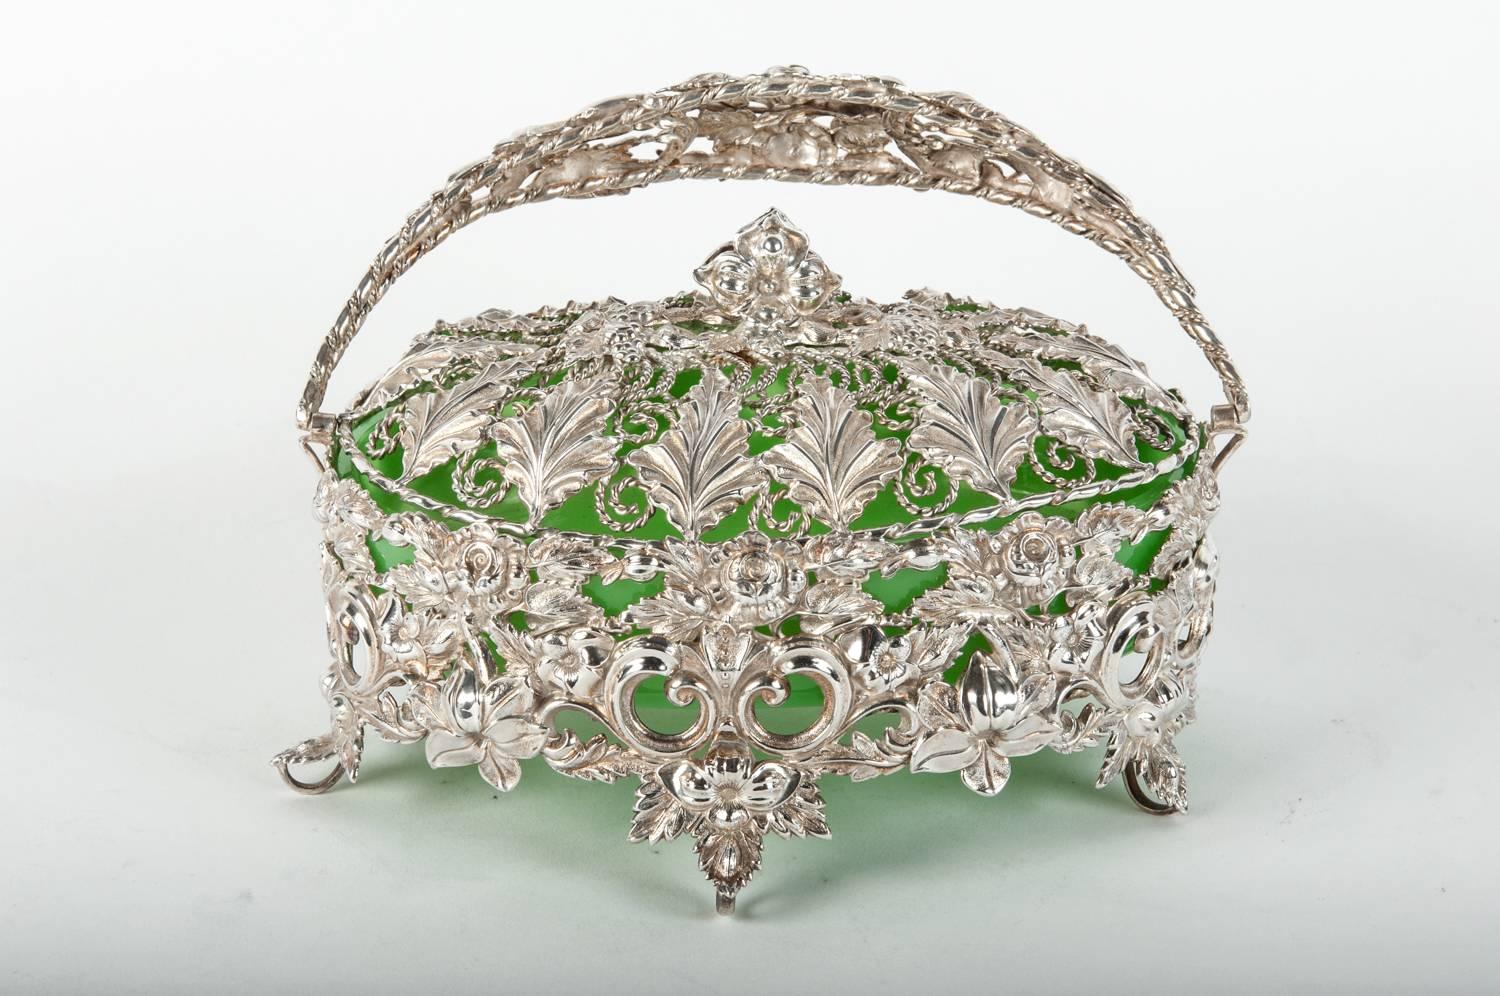 Antique English silver plated basket dish with celadon glass insert. Excellent condition. The dish measure 6.5 inches high X 7 inches diameter.